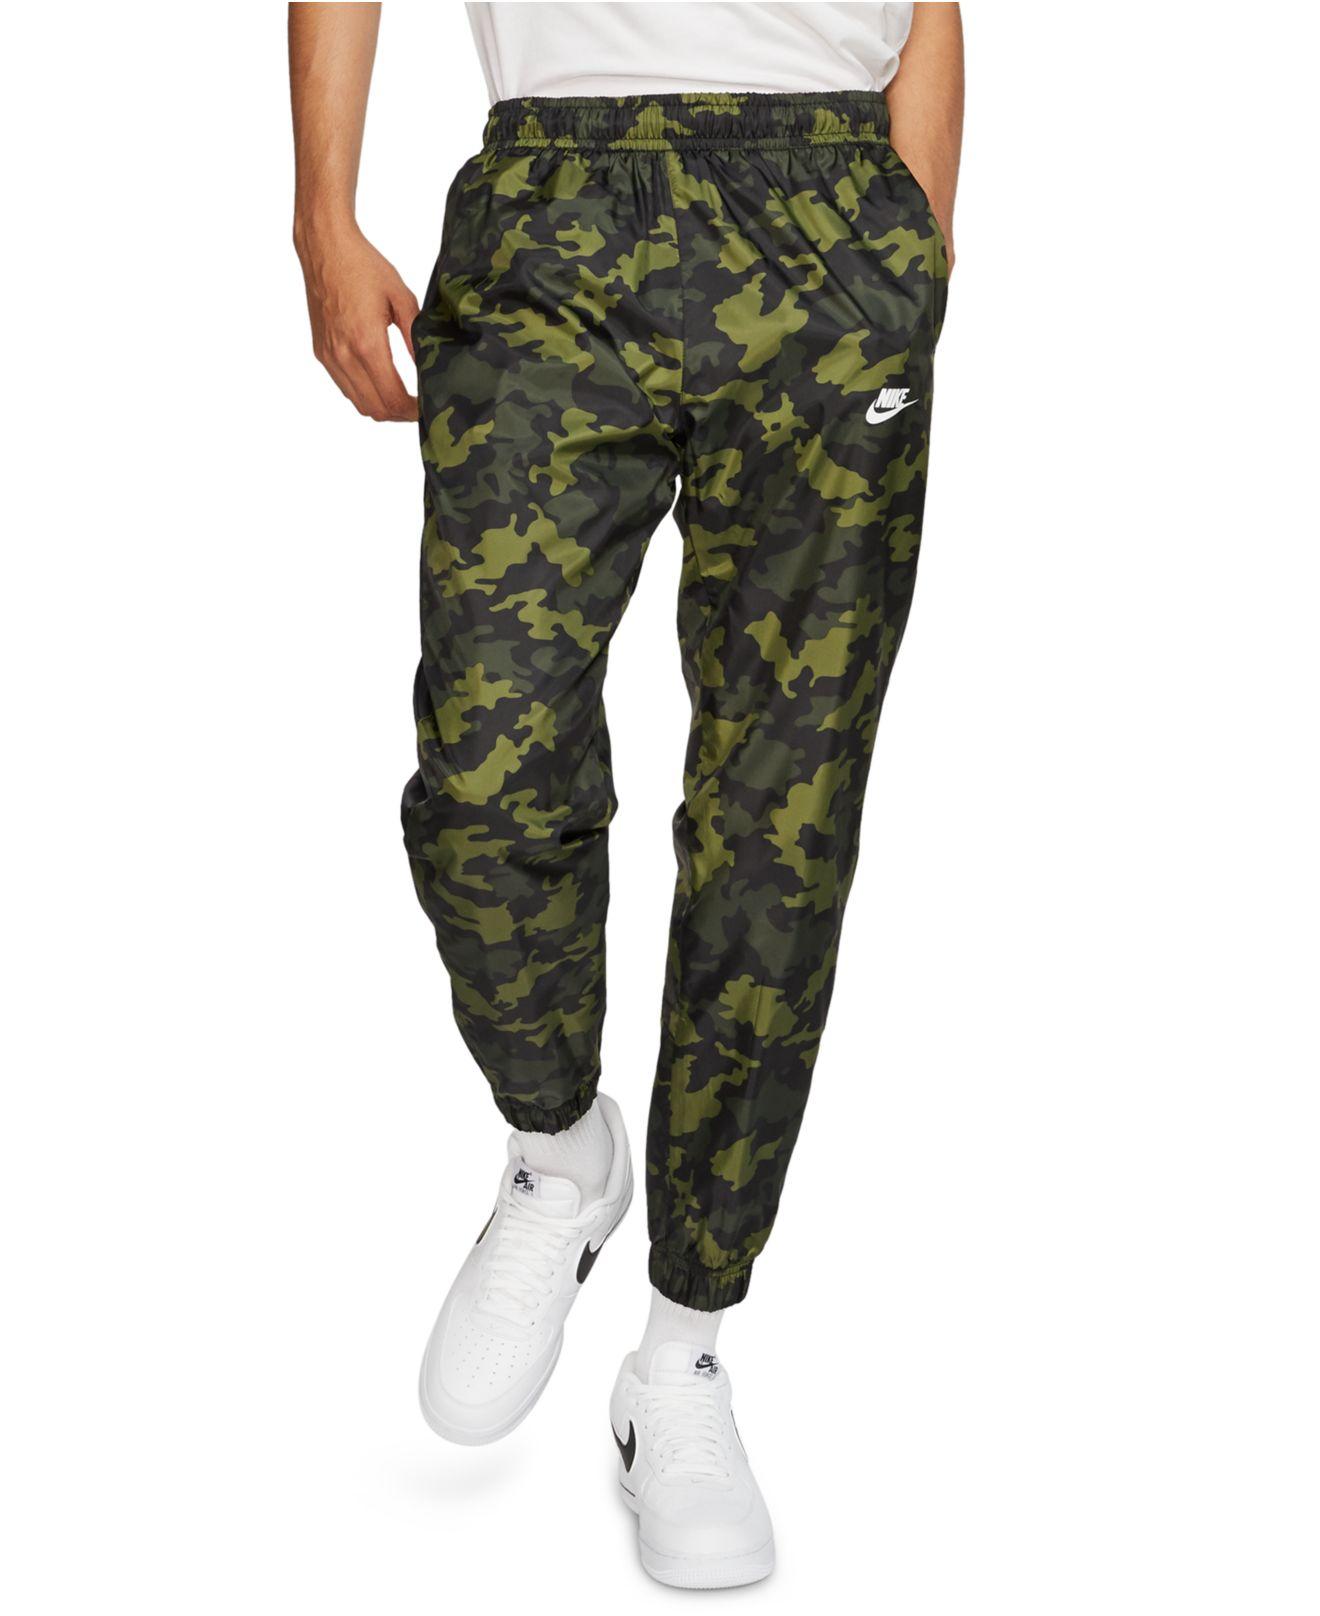 Nike Synthetic Camo Woven Track Pants in Green Camo (Green) for Men - Lyst